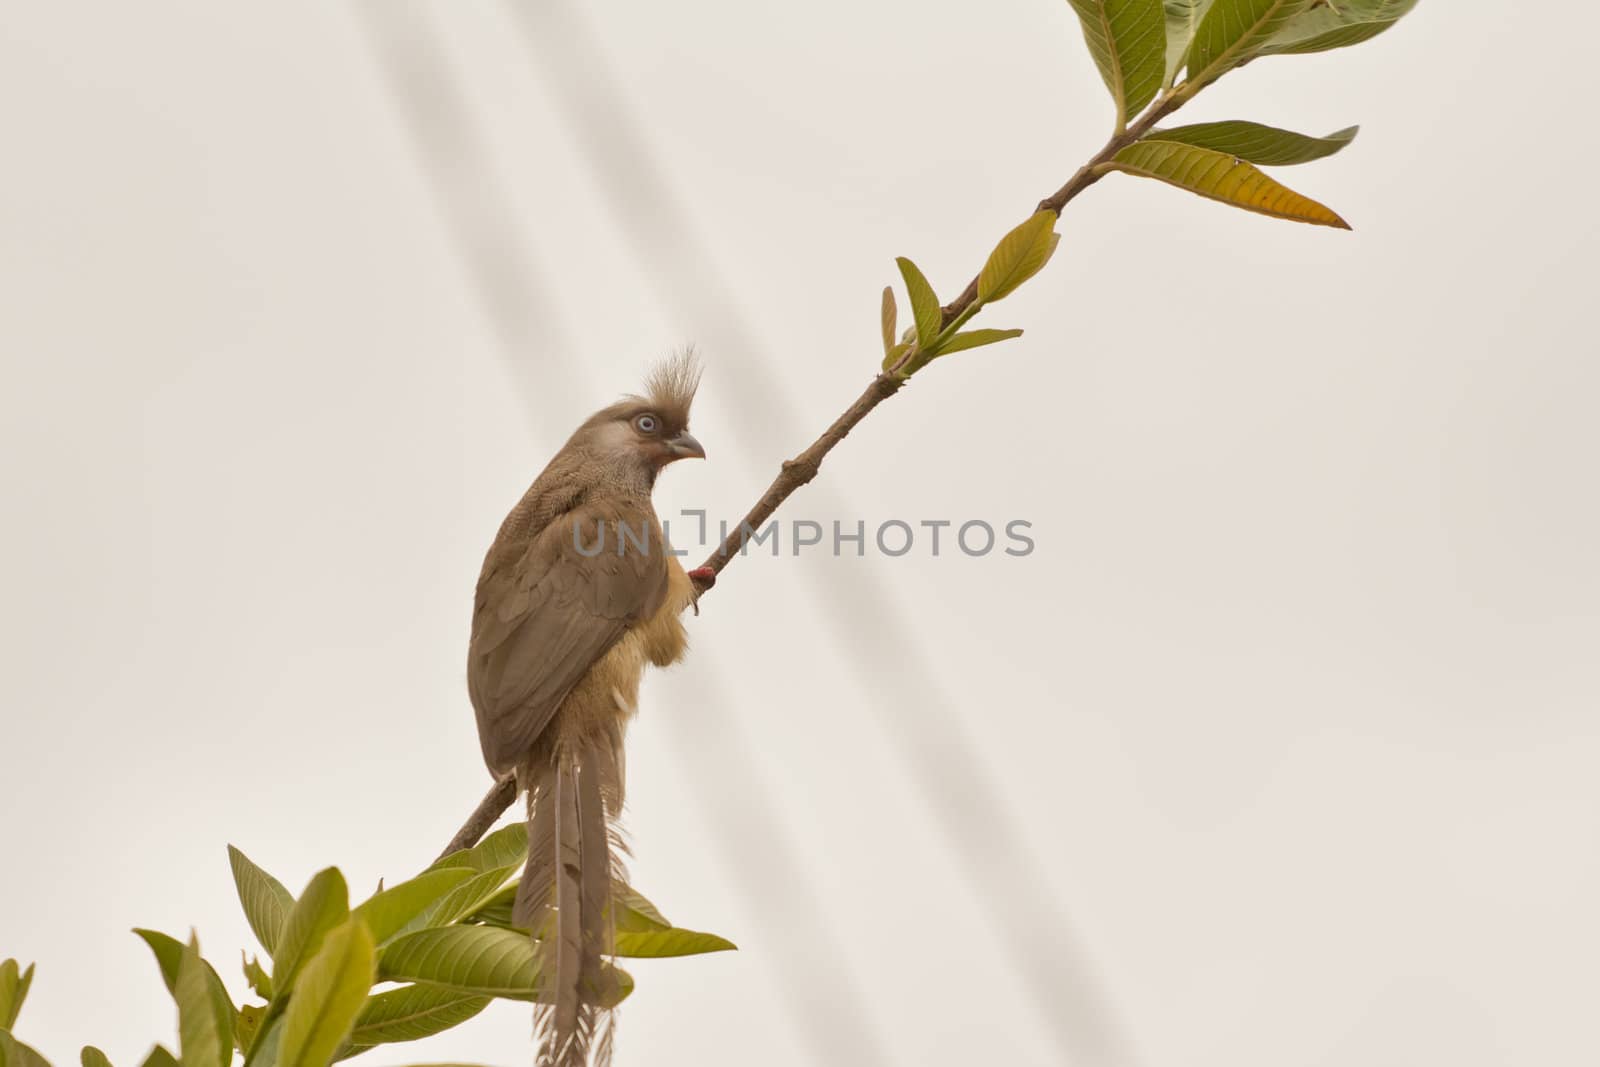 Speckled Mousebird by derejeb